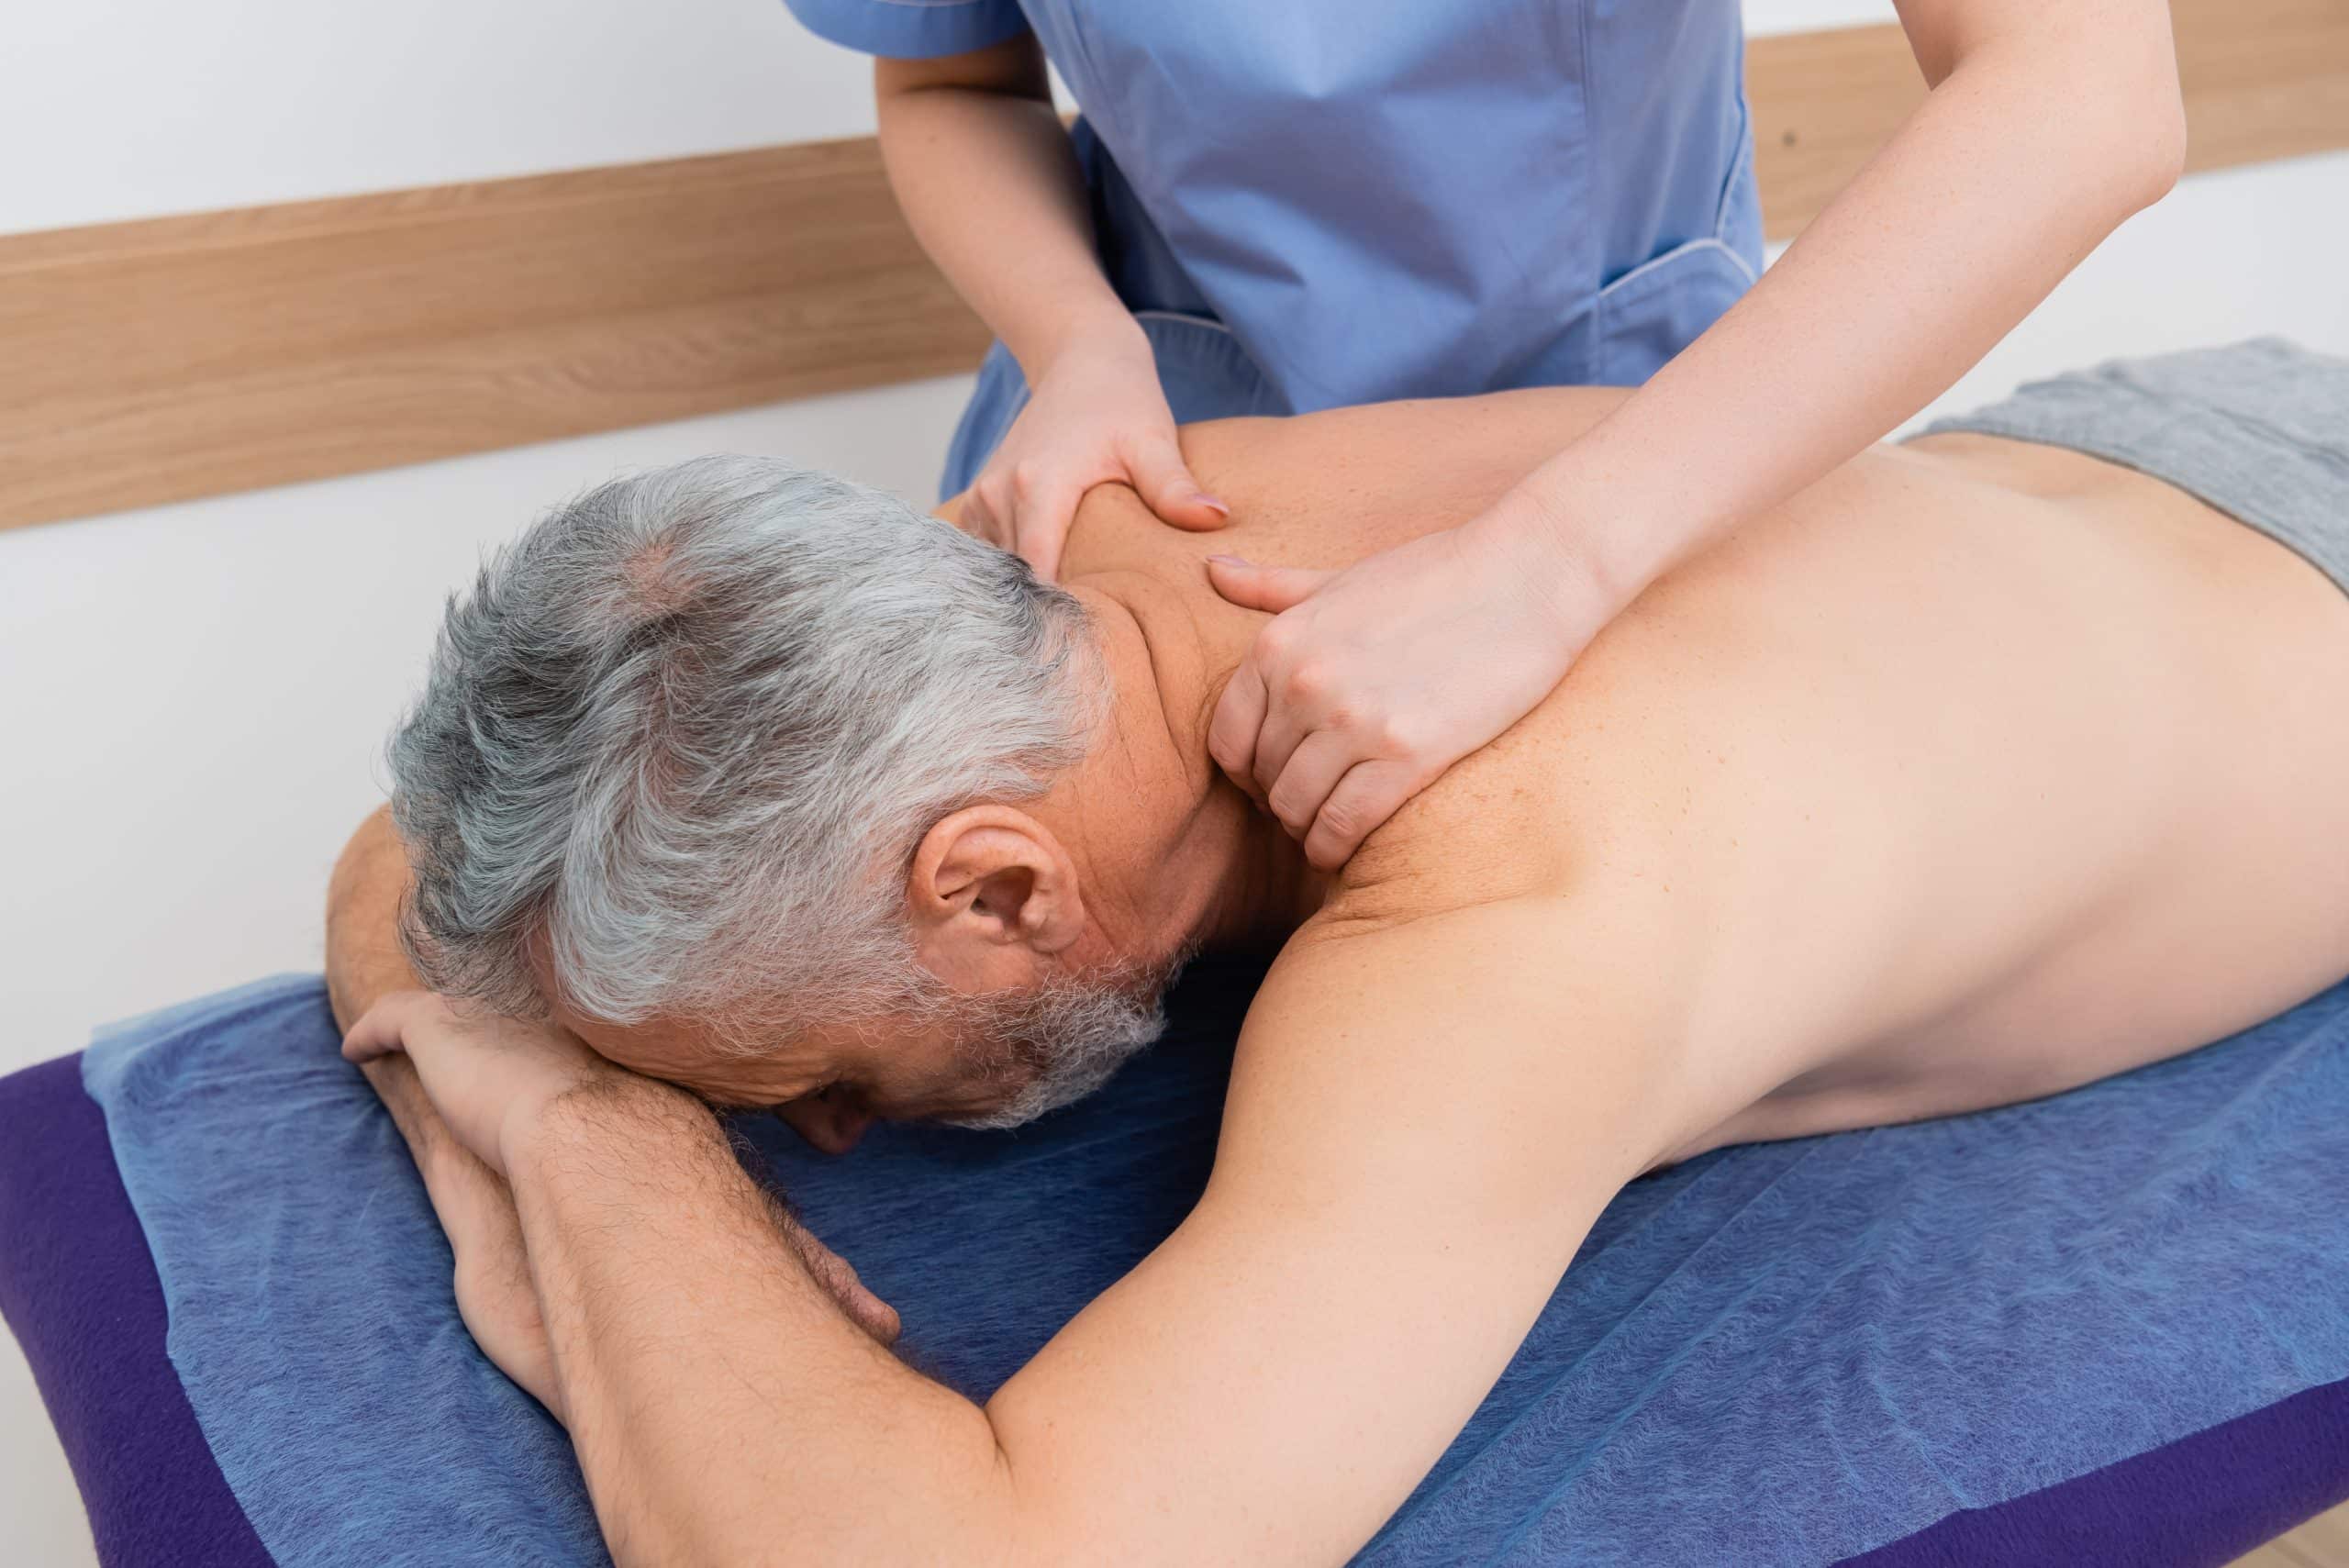 Man receiving medical massage therapy.